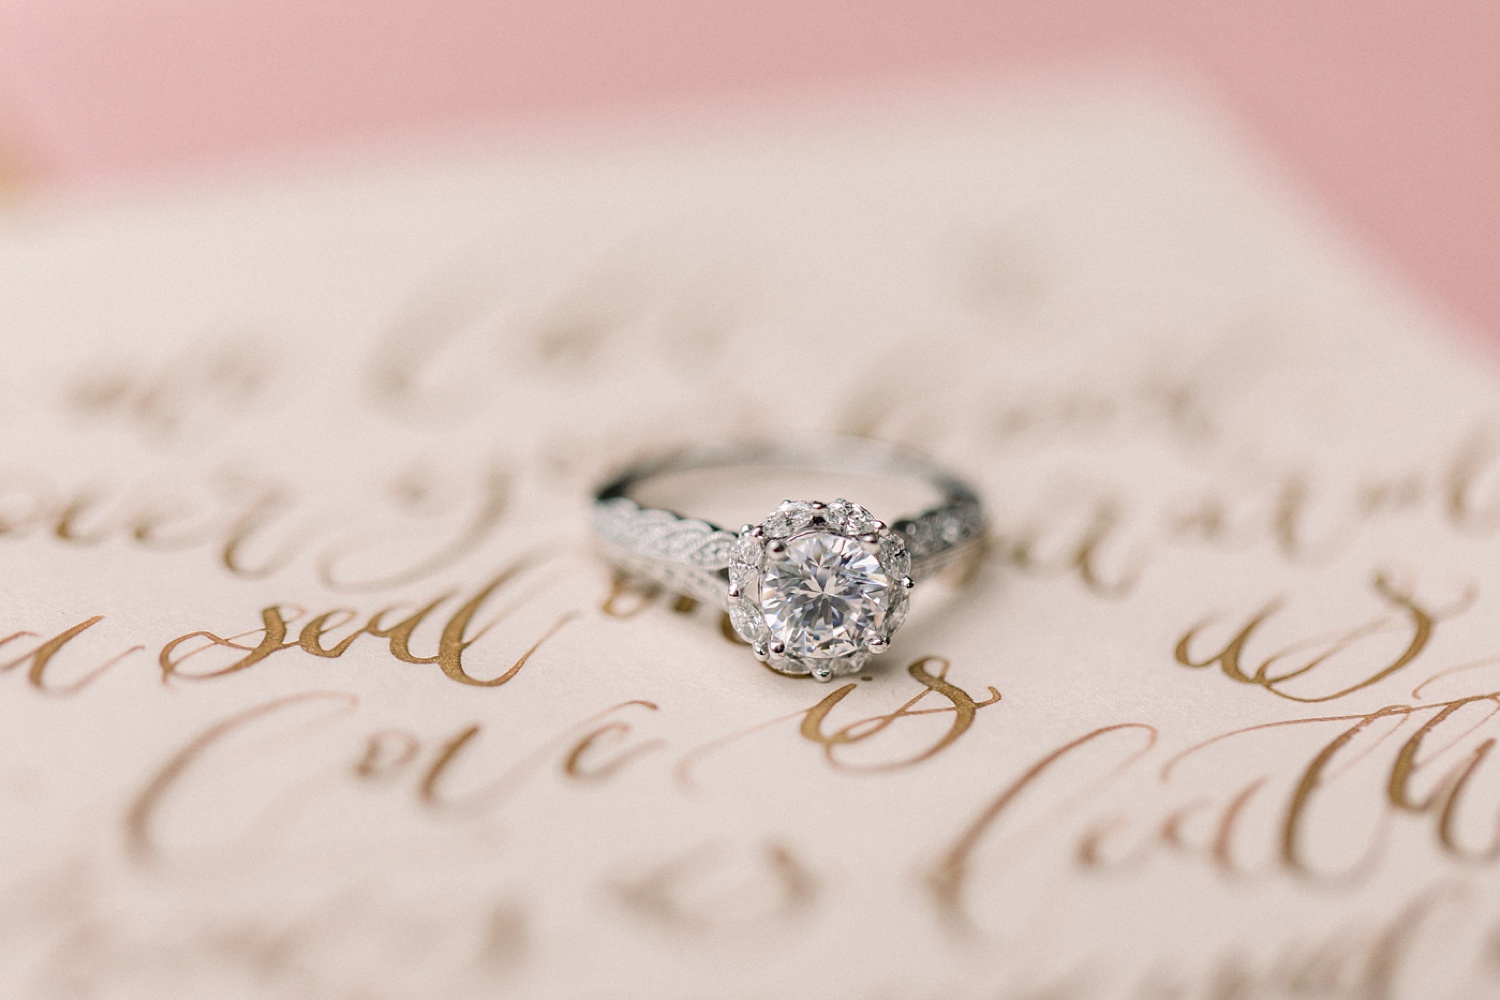 diamond ring rests on invitation with calligraphy